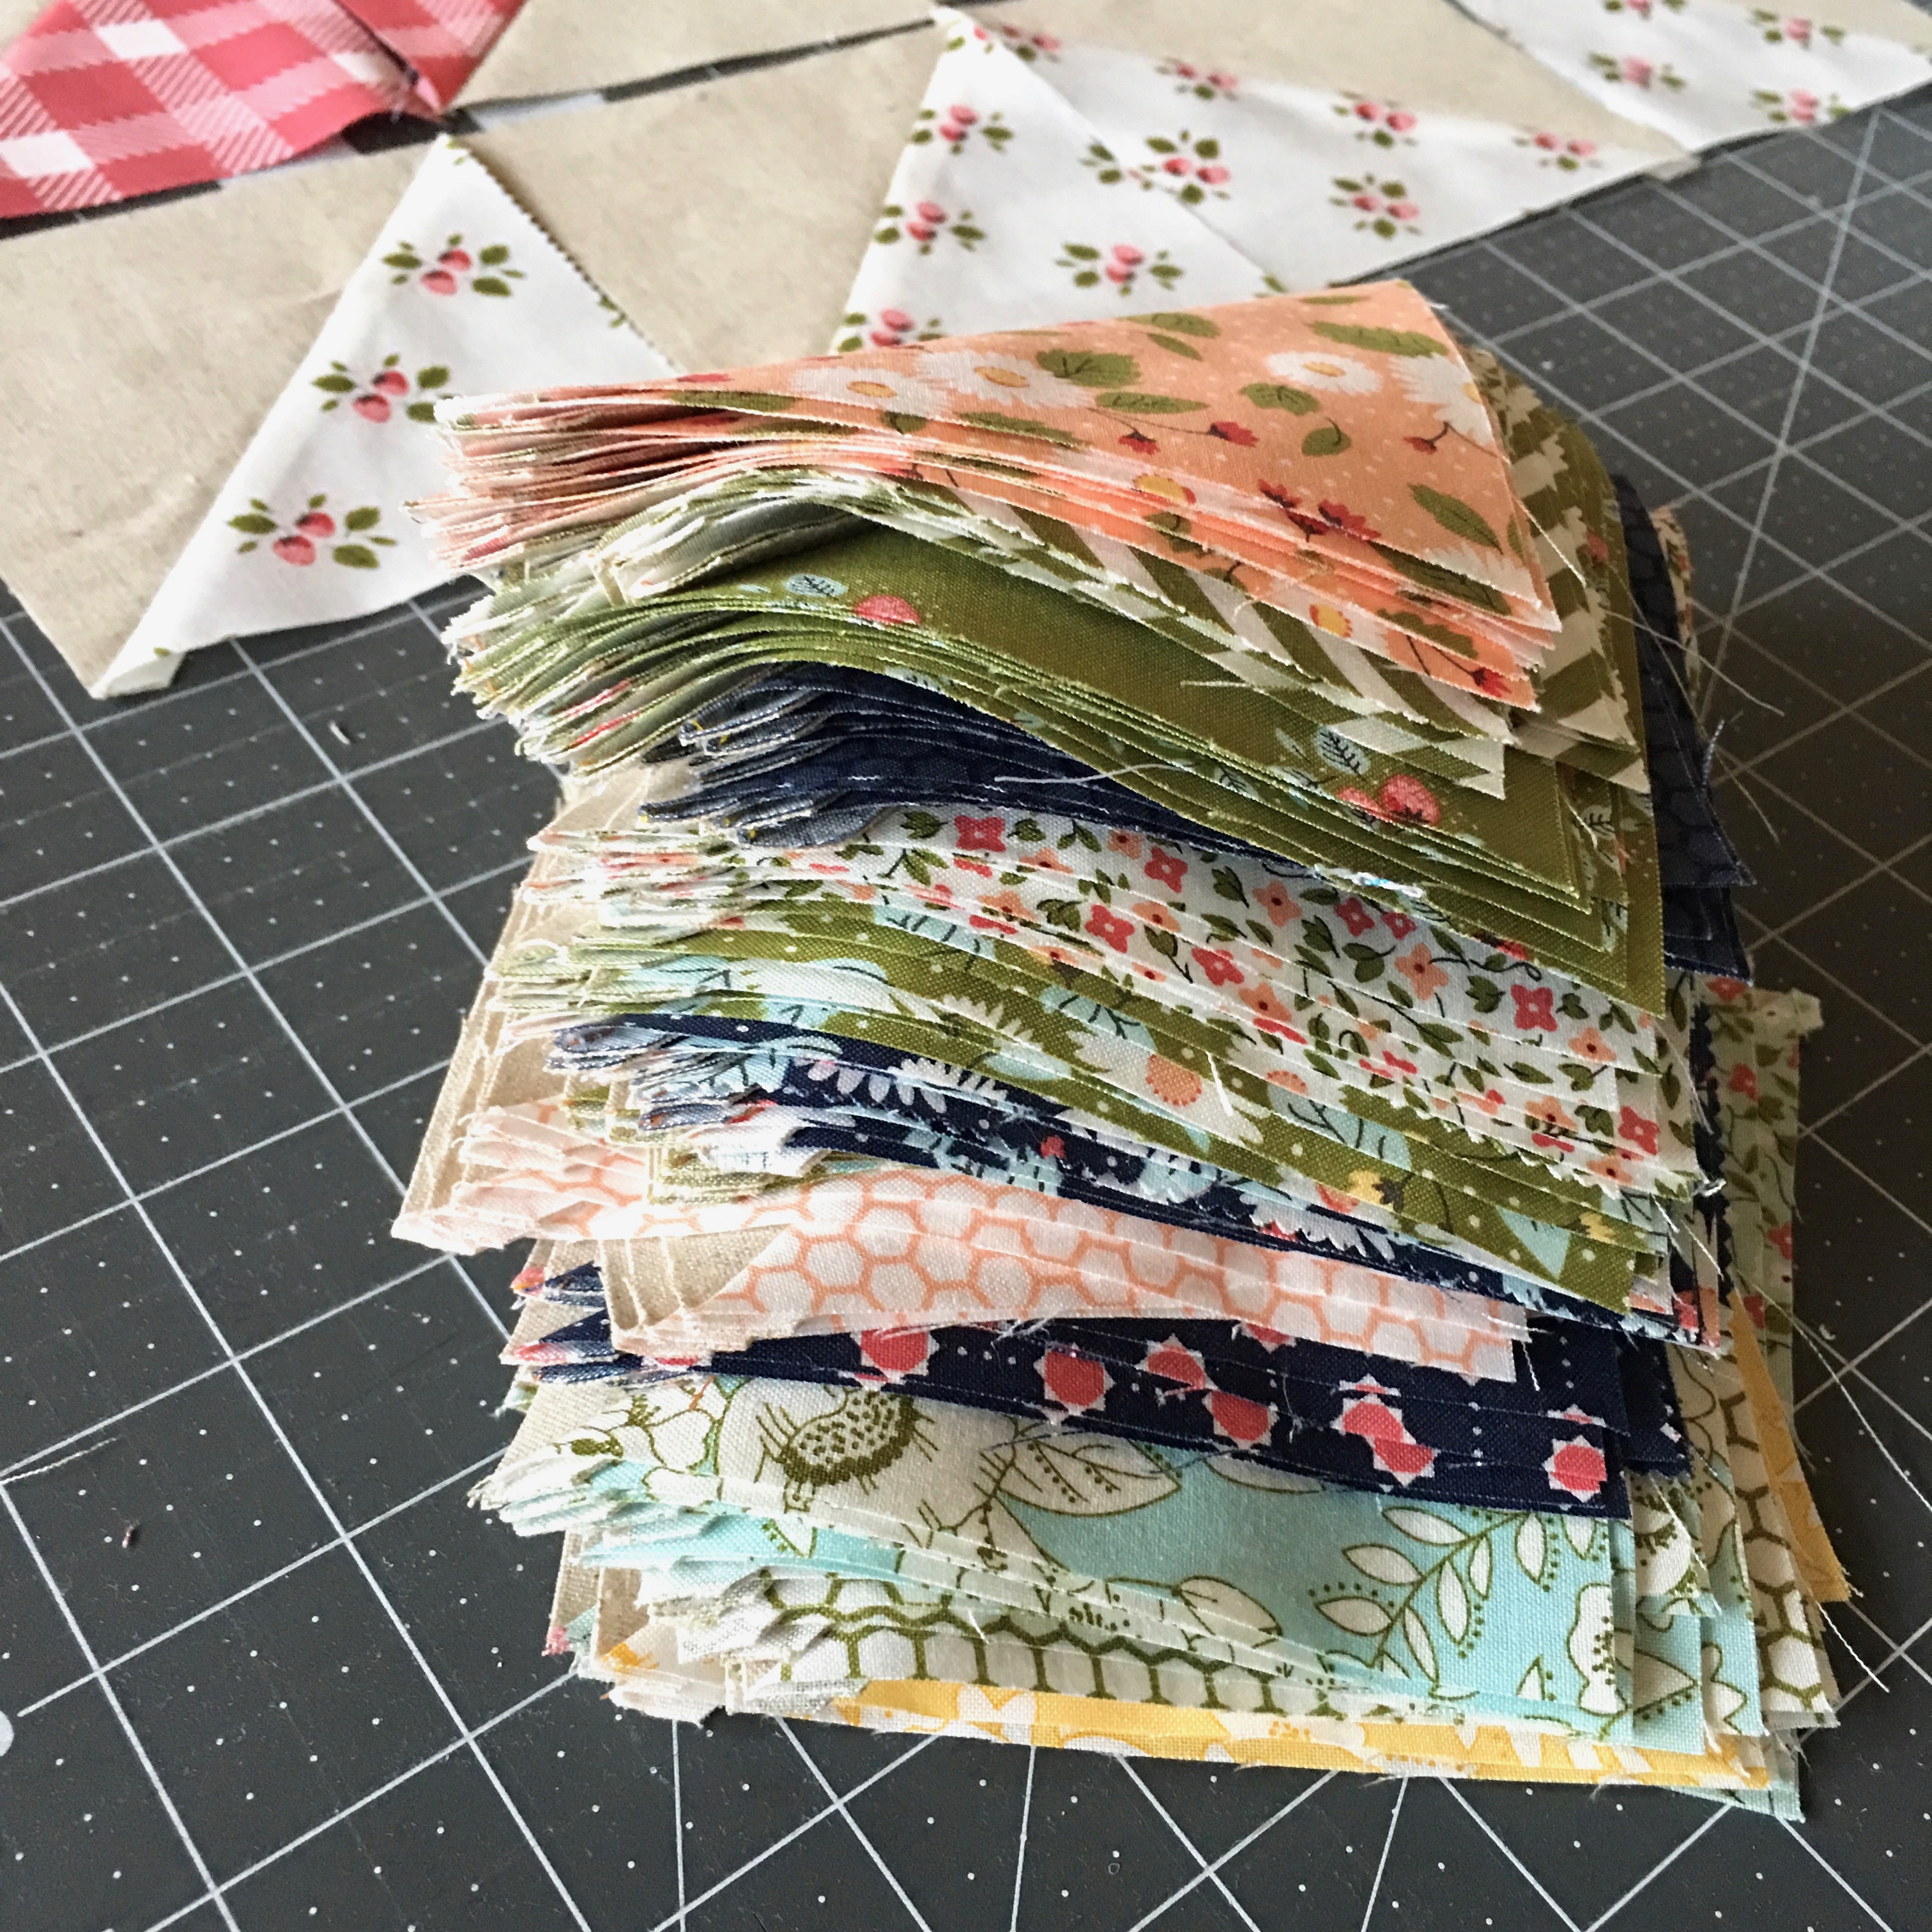 How To Sew With Tiny Fabric Scraps - Made By Marzipan